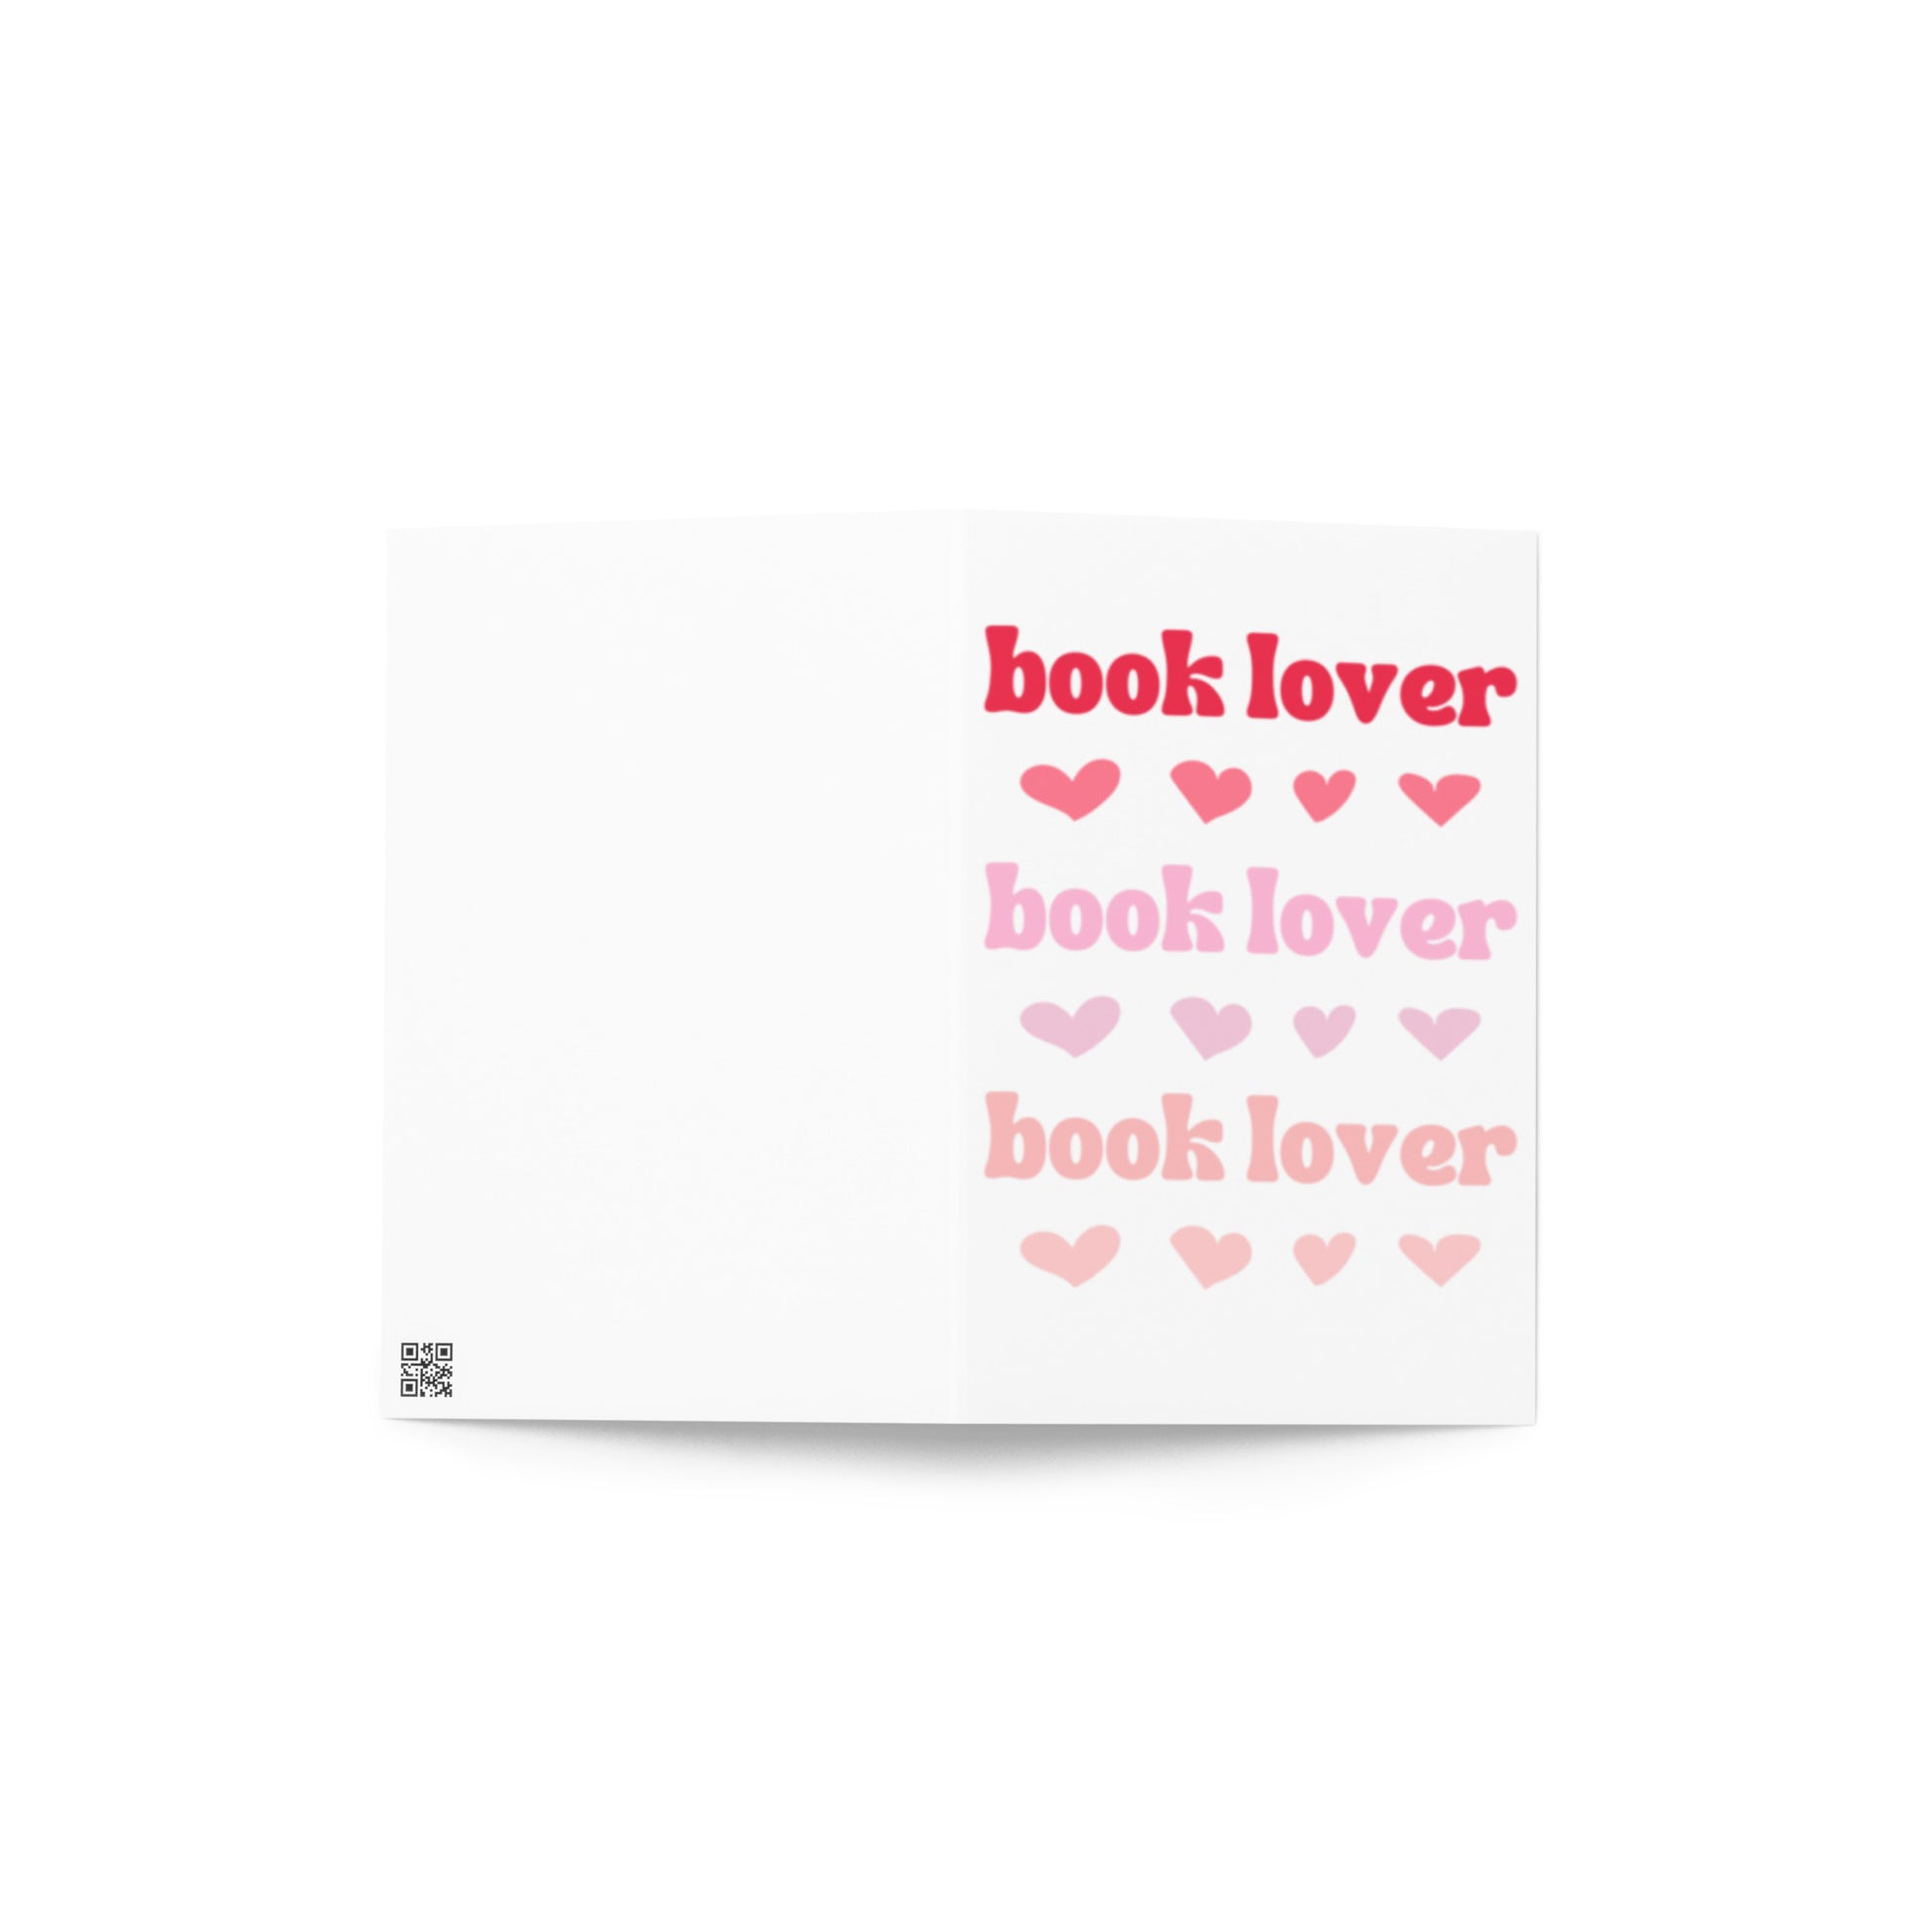 Book Lover Greeting Card - The Spinster Librarian Shop